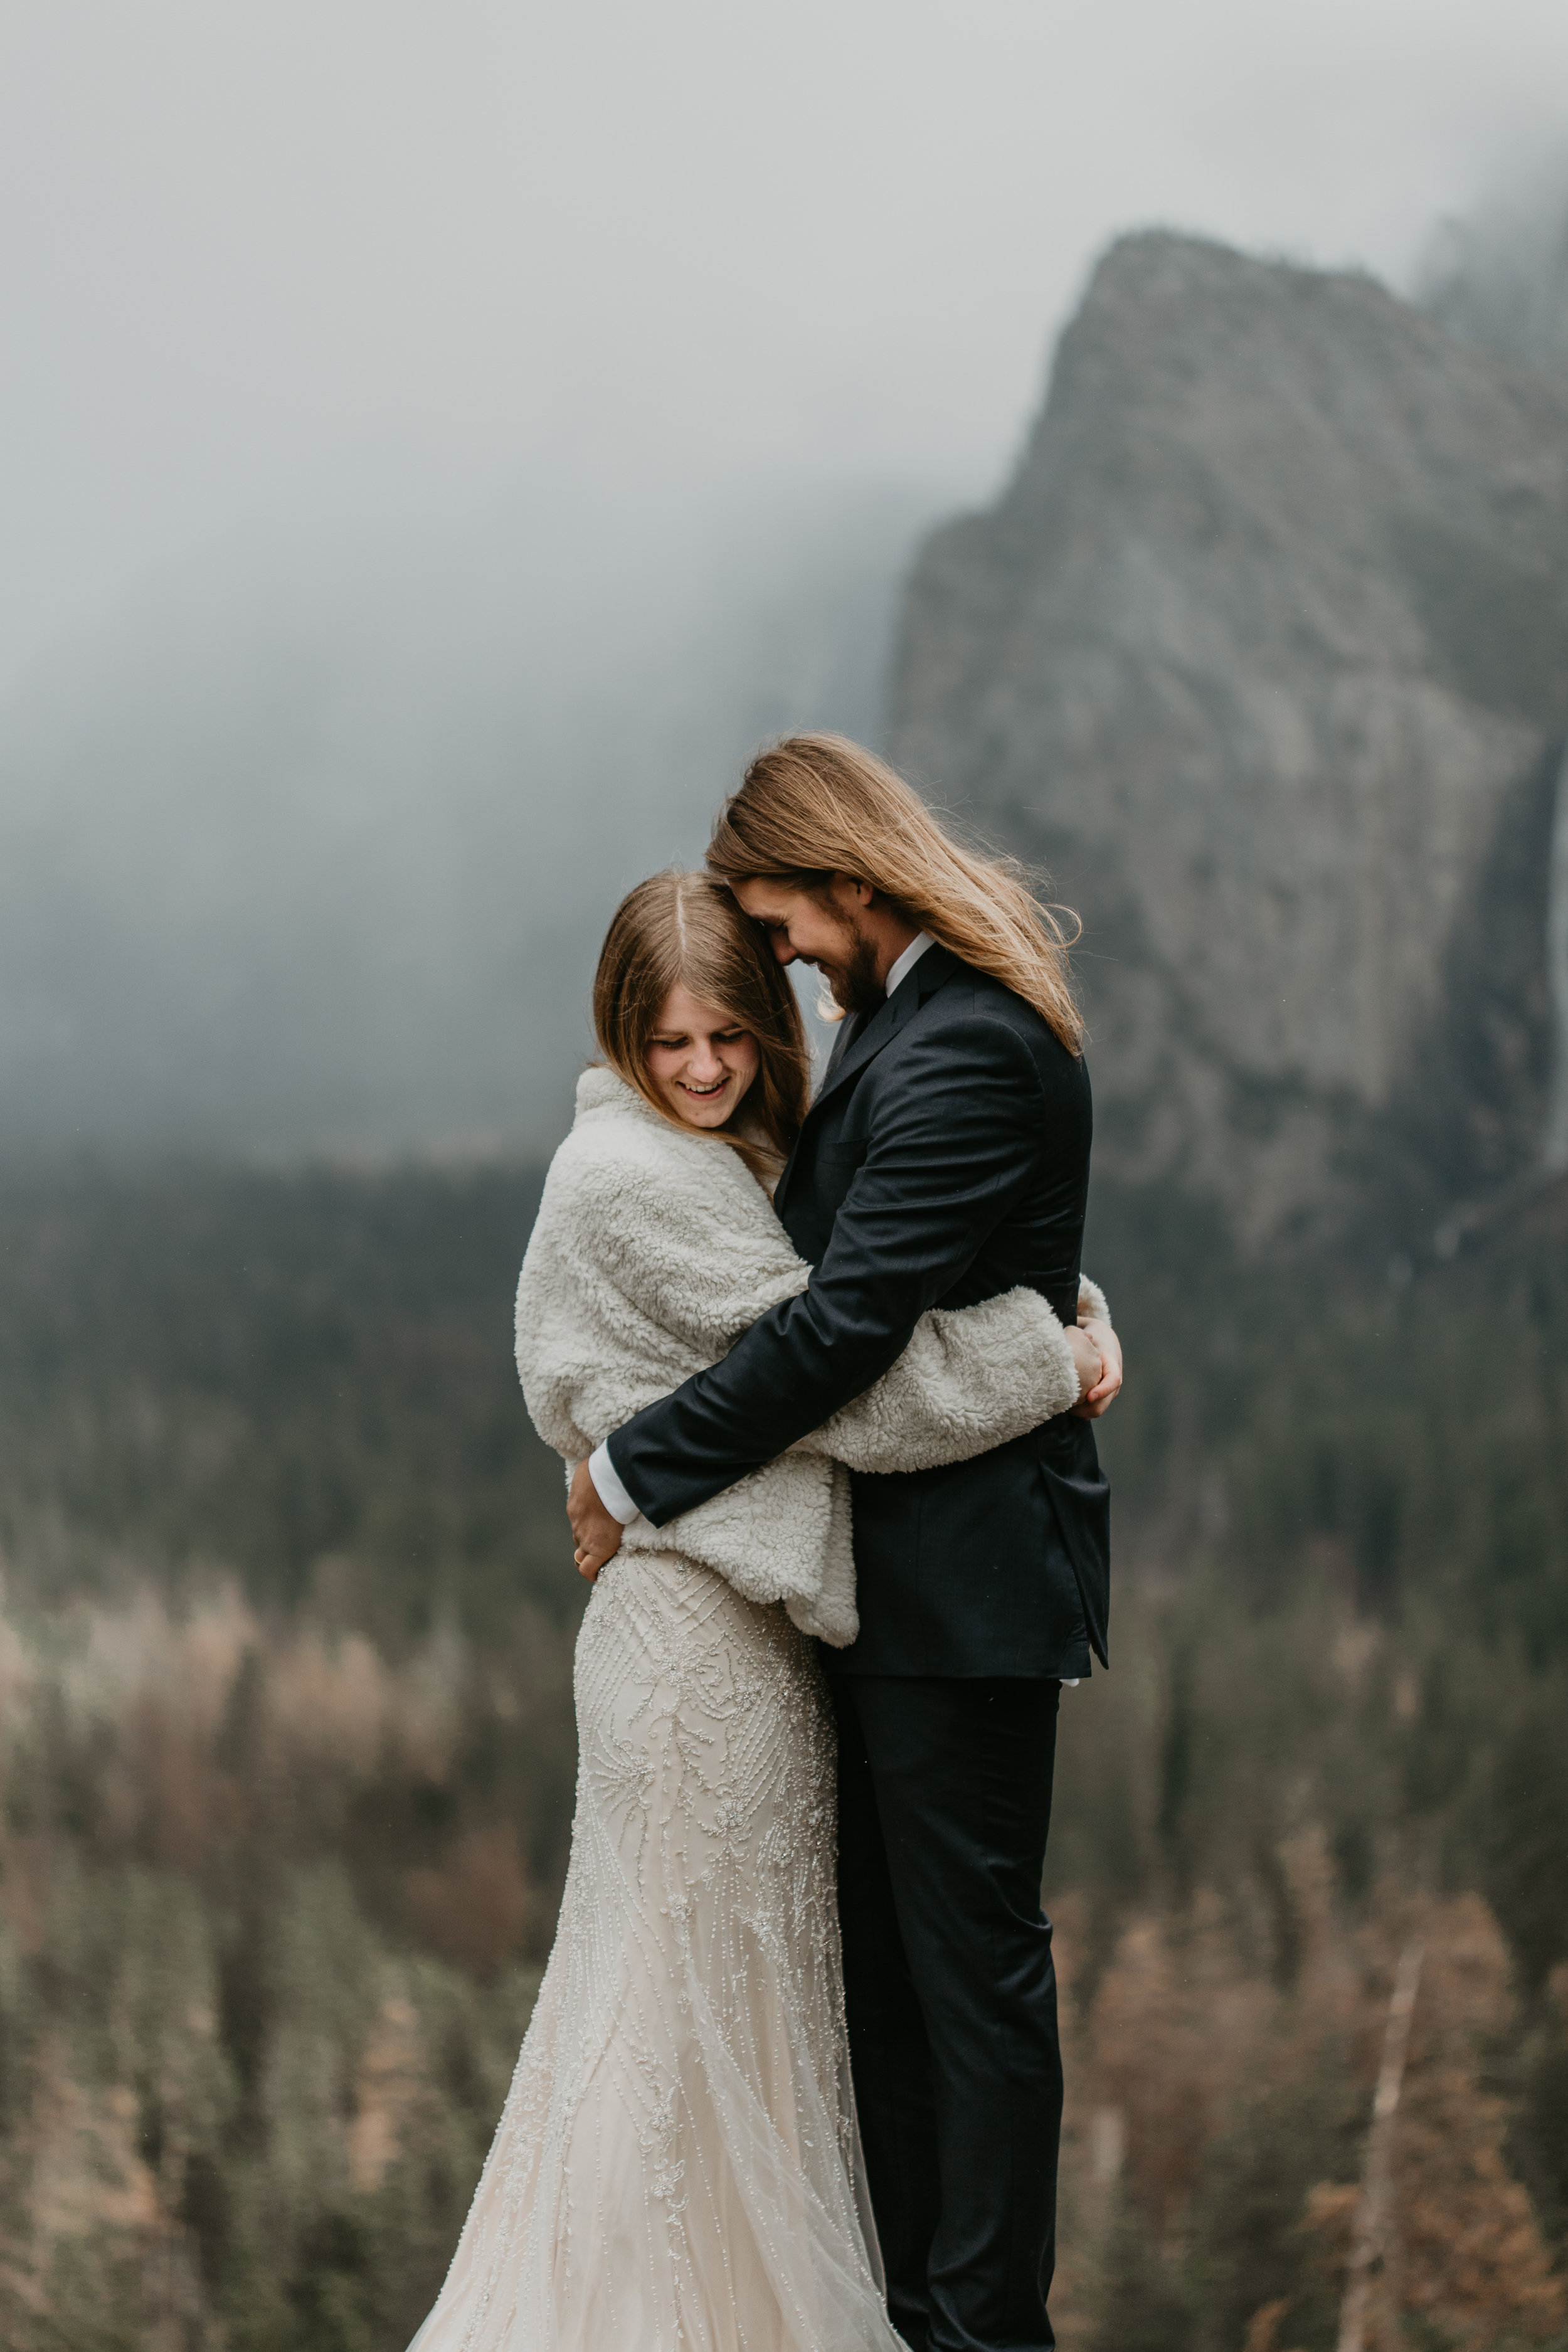 nicole-daacke-photography-yousemite-national-park-elopement-photographer-winter-cloud-moody-elope-inspiration-yosemite-valley-tunnel-view-winter-cloud-fog-weather-wedding-photos-14.jpg